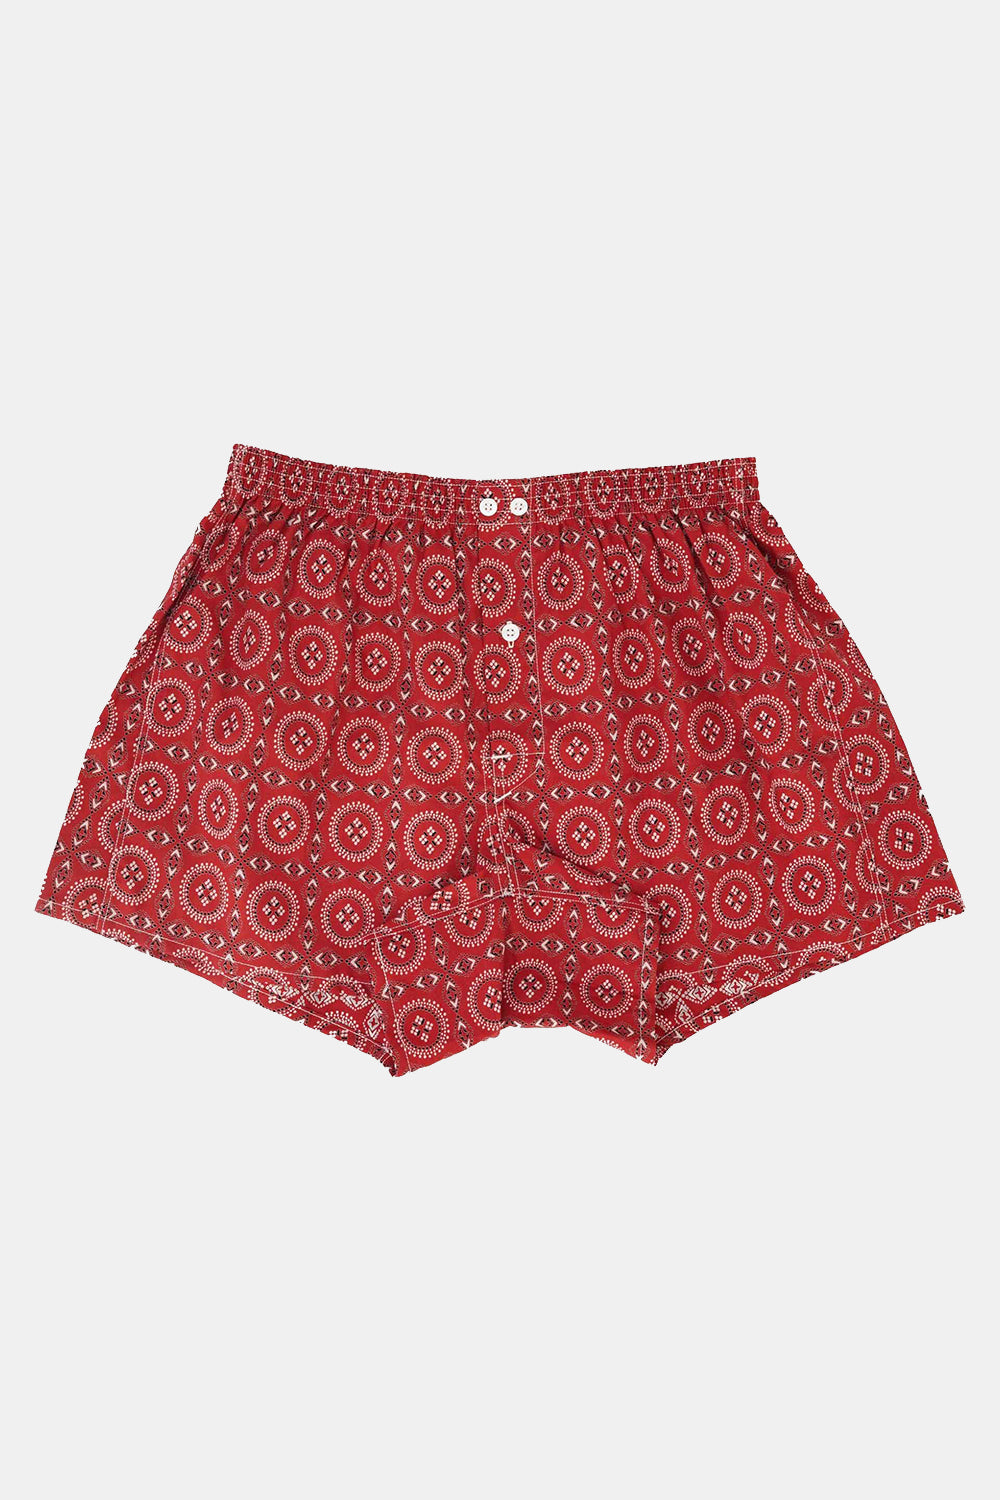 Anonymous Ism Vintage Bandana Print Boxers - Red | Number Six